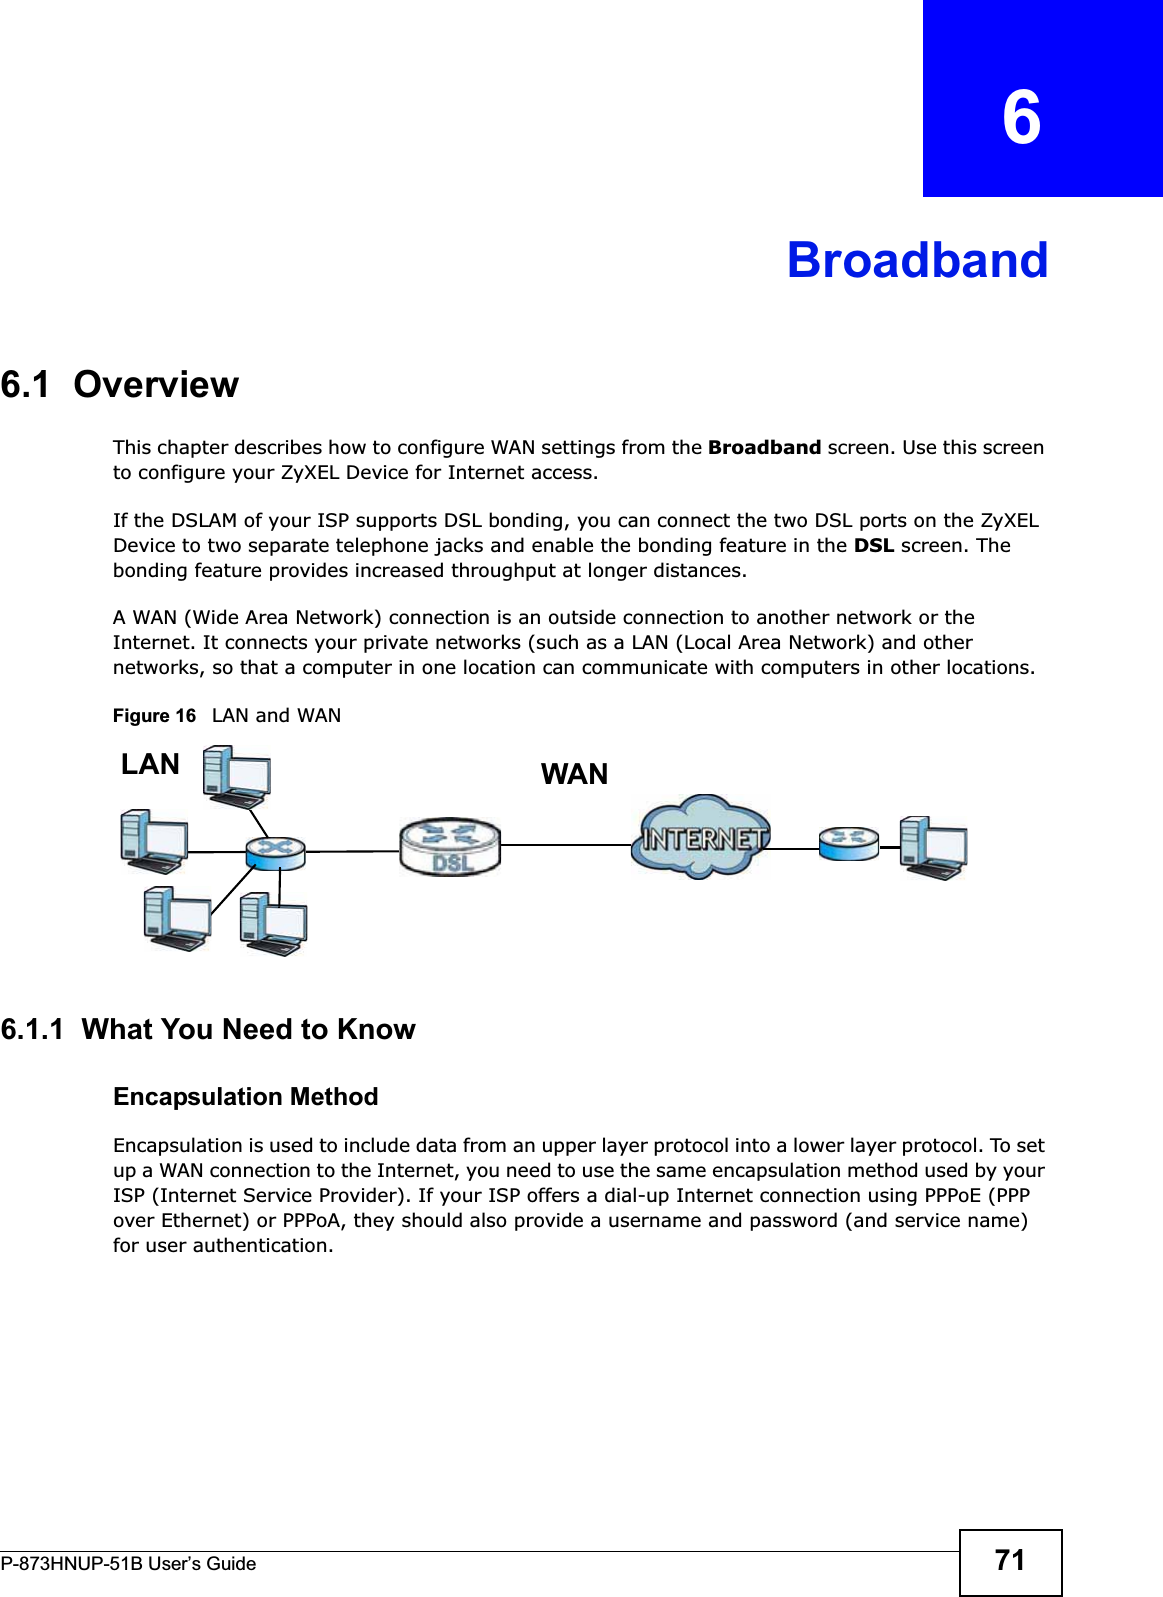 P-873HNUP-51B User’s Guide 71CHAPTER   6Broadband6.1  OverviewThis chapter describes how to configure WAN settings from the Broadband screen. Use this screen to configure your ZyXEL Device for Internet access. If the DSLAM of your ISP supports DSL bonding, you can connect the two DSL ports on the ZyXEL Device to two separate telephone jacks and enable the bonding feature in the DSL screen. The bonding feature provides increased throughput at longer distances.A WAN (Wide Area Network) connection is an outside connection to another network or the Internet. It connects your private networks (such as a LAN (Local Area Network) and other networks, so that a computer in one location can communicate with computers in other locations.Figure 16   LAN and WAN6.1.1  What You Need to KnowEncapsulation MethodEncapsulation is used to include data from an upper layer protocol into a lower layer protocol. To set up a WAN connection to the Internet, you need to use the same encapsulation method used by your ISP (Internet Service Provider). If your ISP offers a dial-up Internet connection using PPPoE (PPP over Ethernet) or PPPoA, they should also provide a username and password (and service name) for user authentication.WANLAN